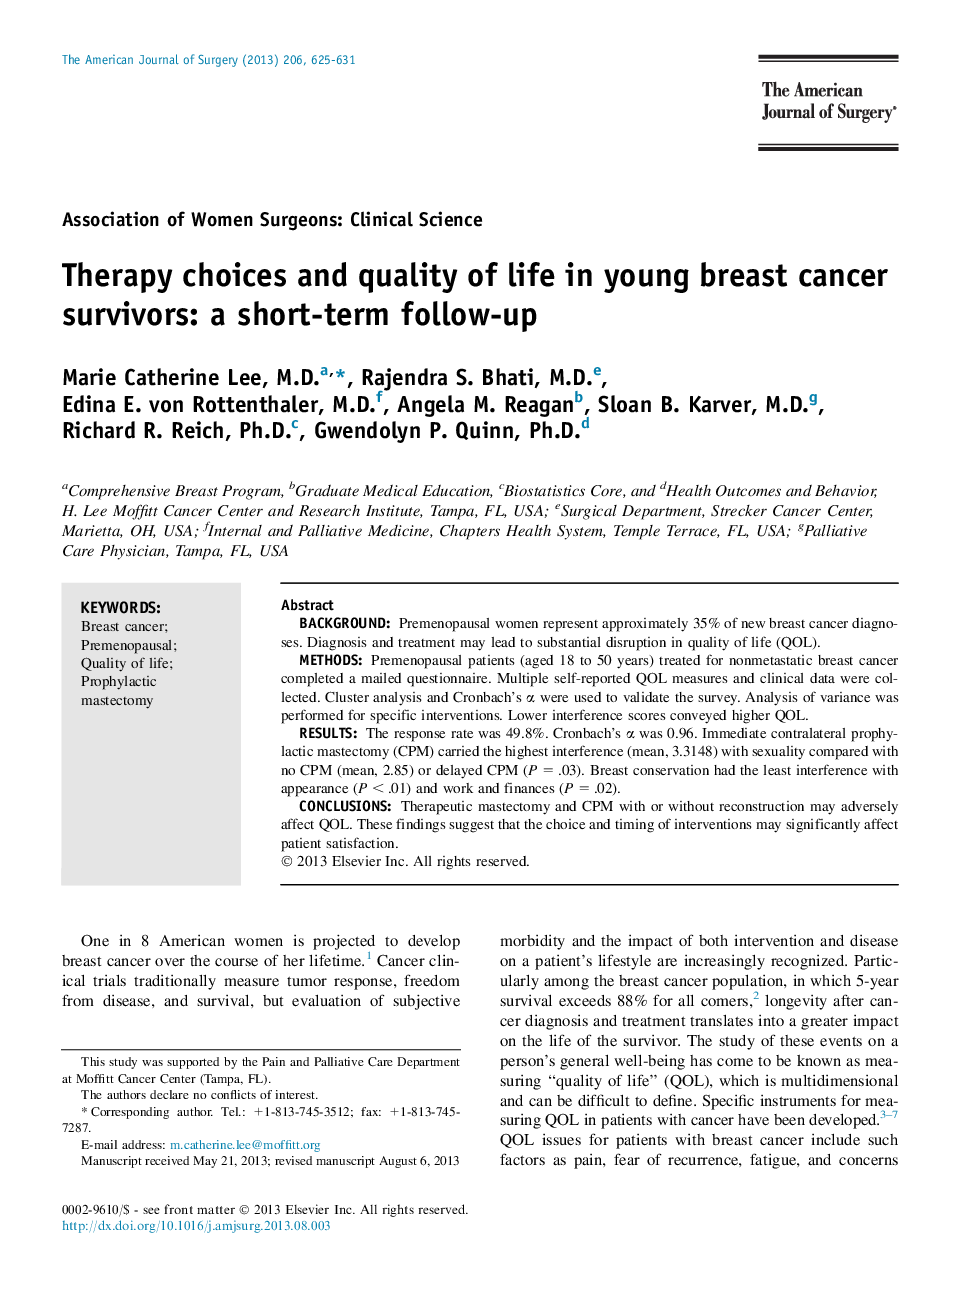 Therapy choices and quality of life in young breast cancer survivors: a short-term follow-up 